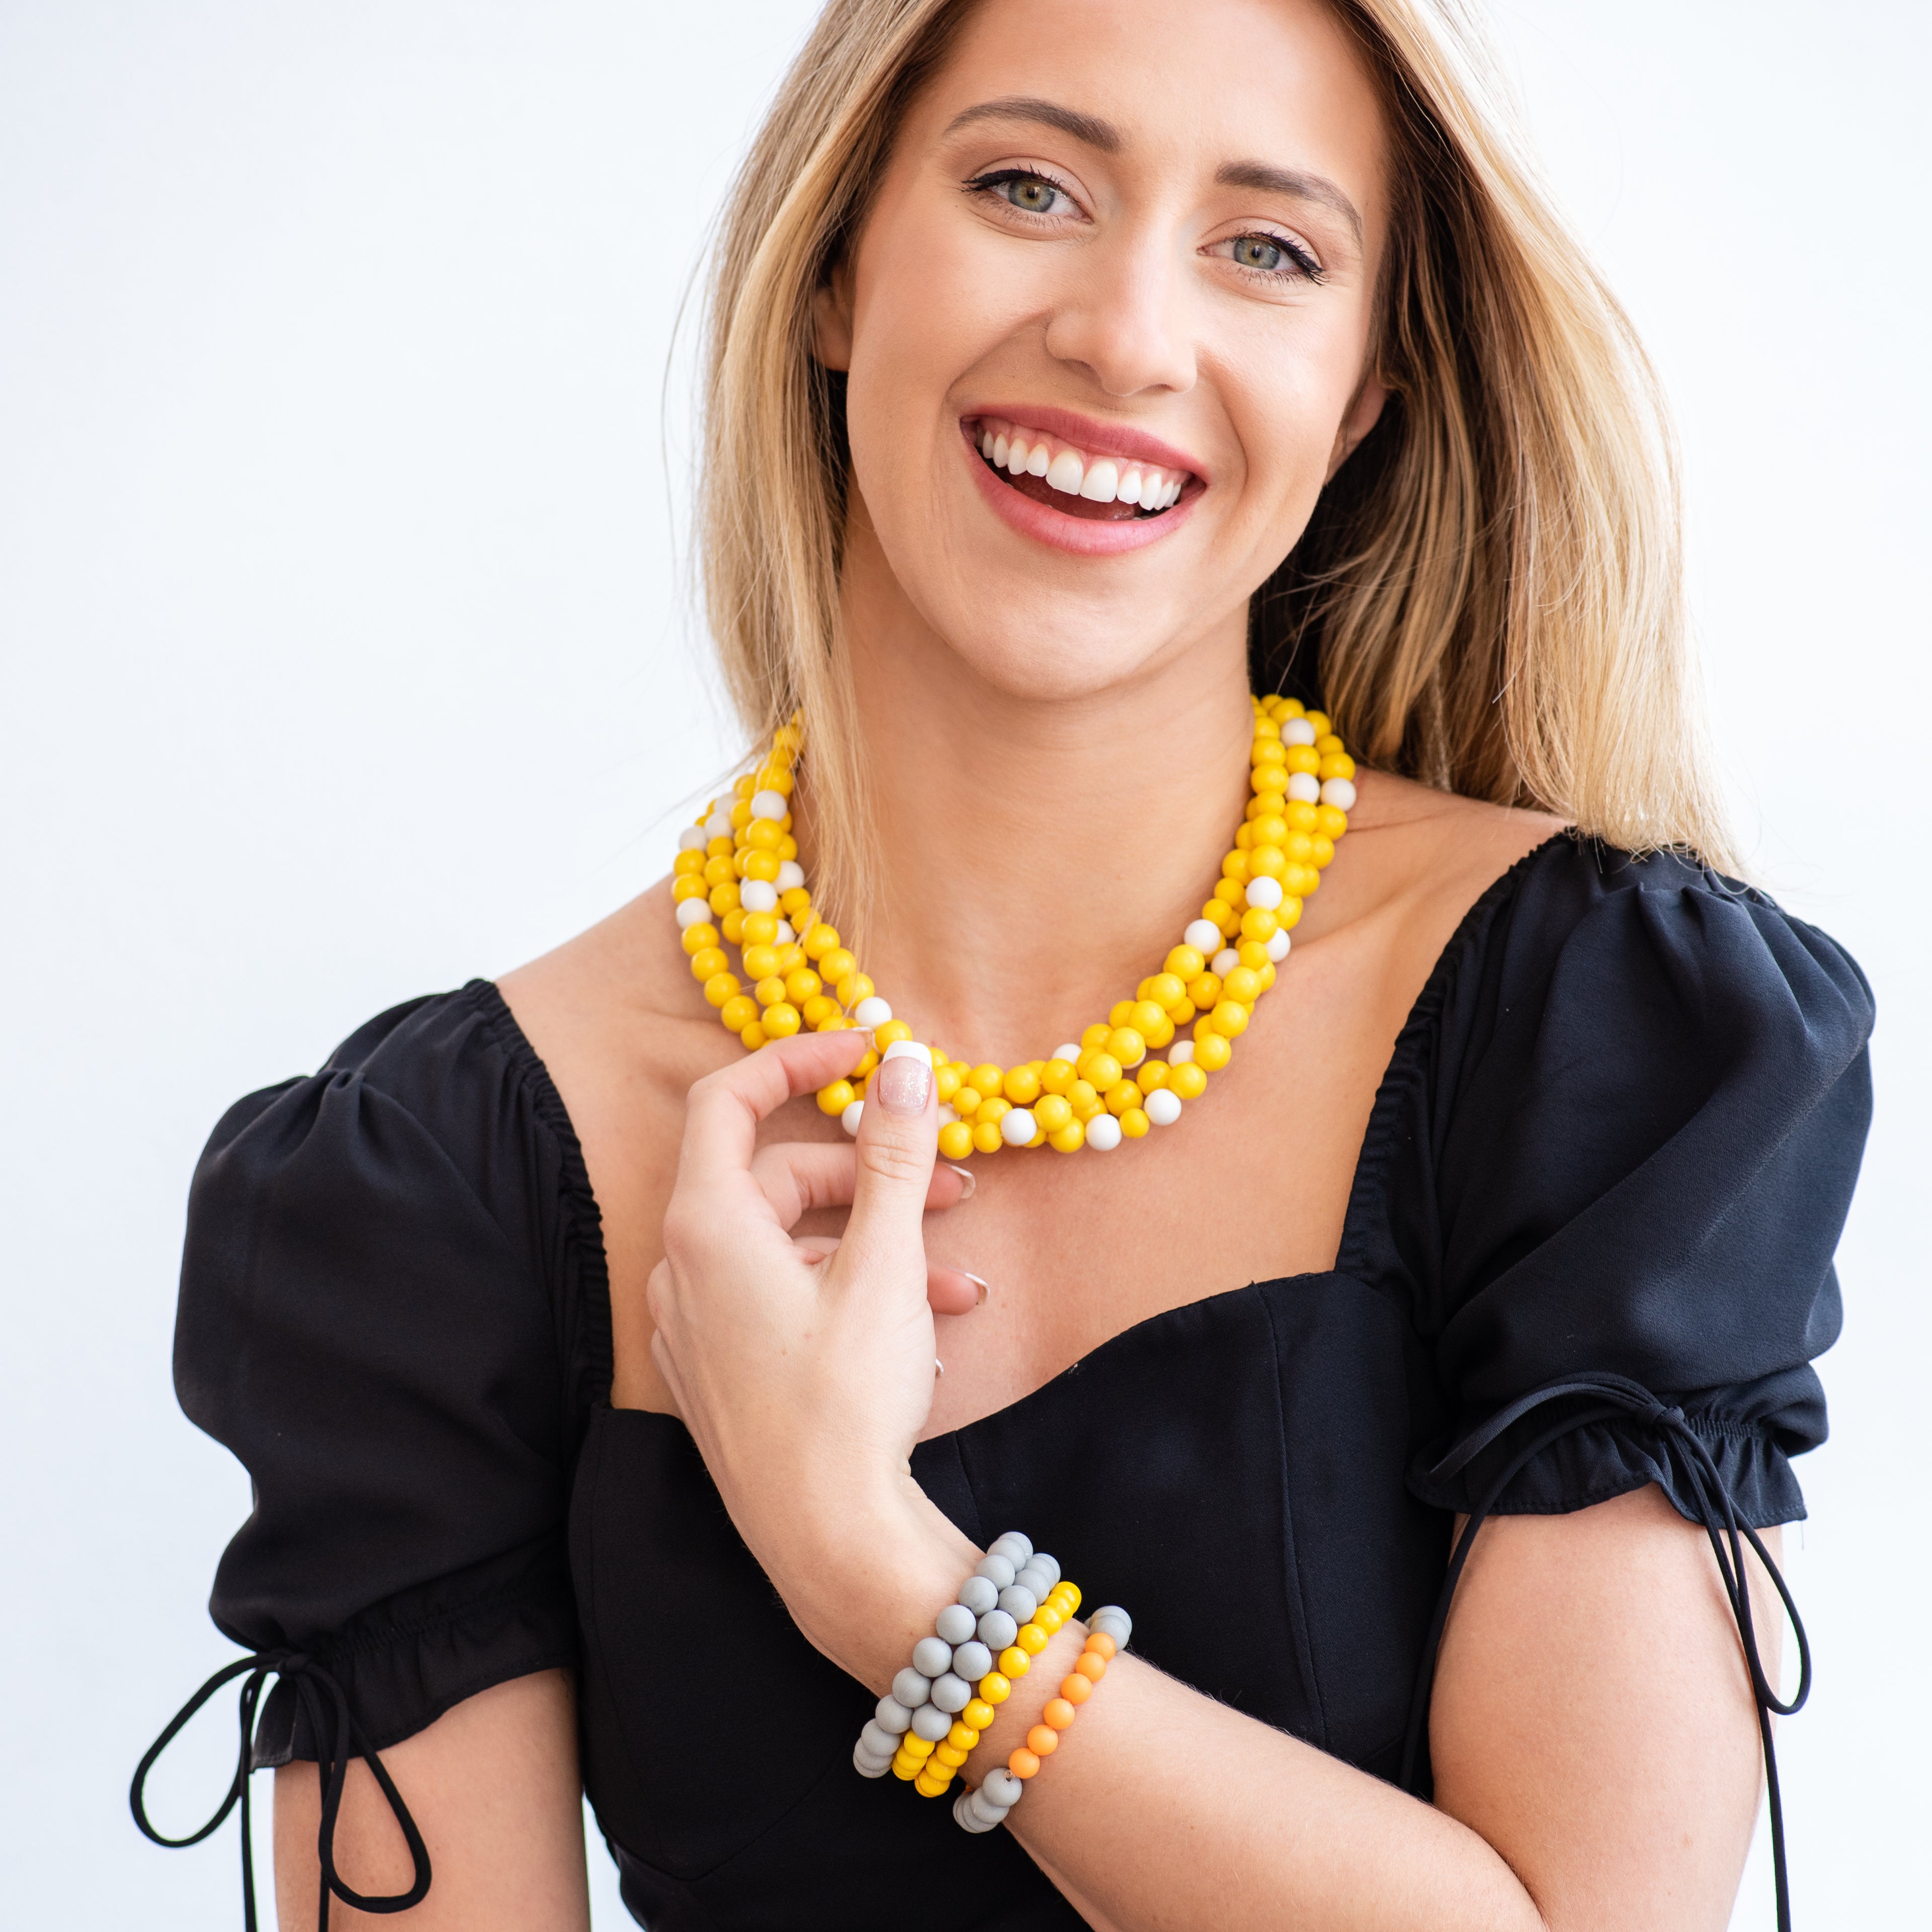 bright yellow necklace